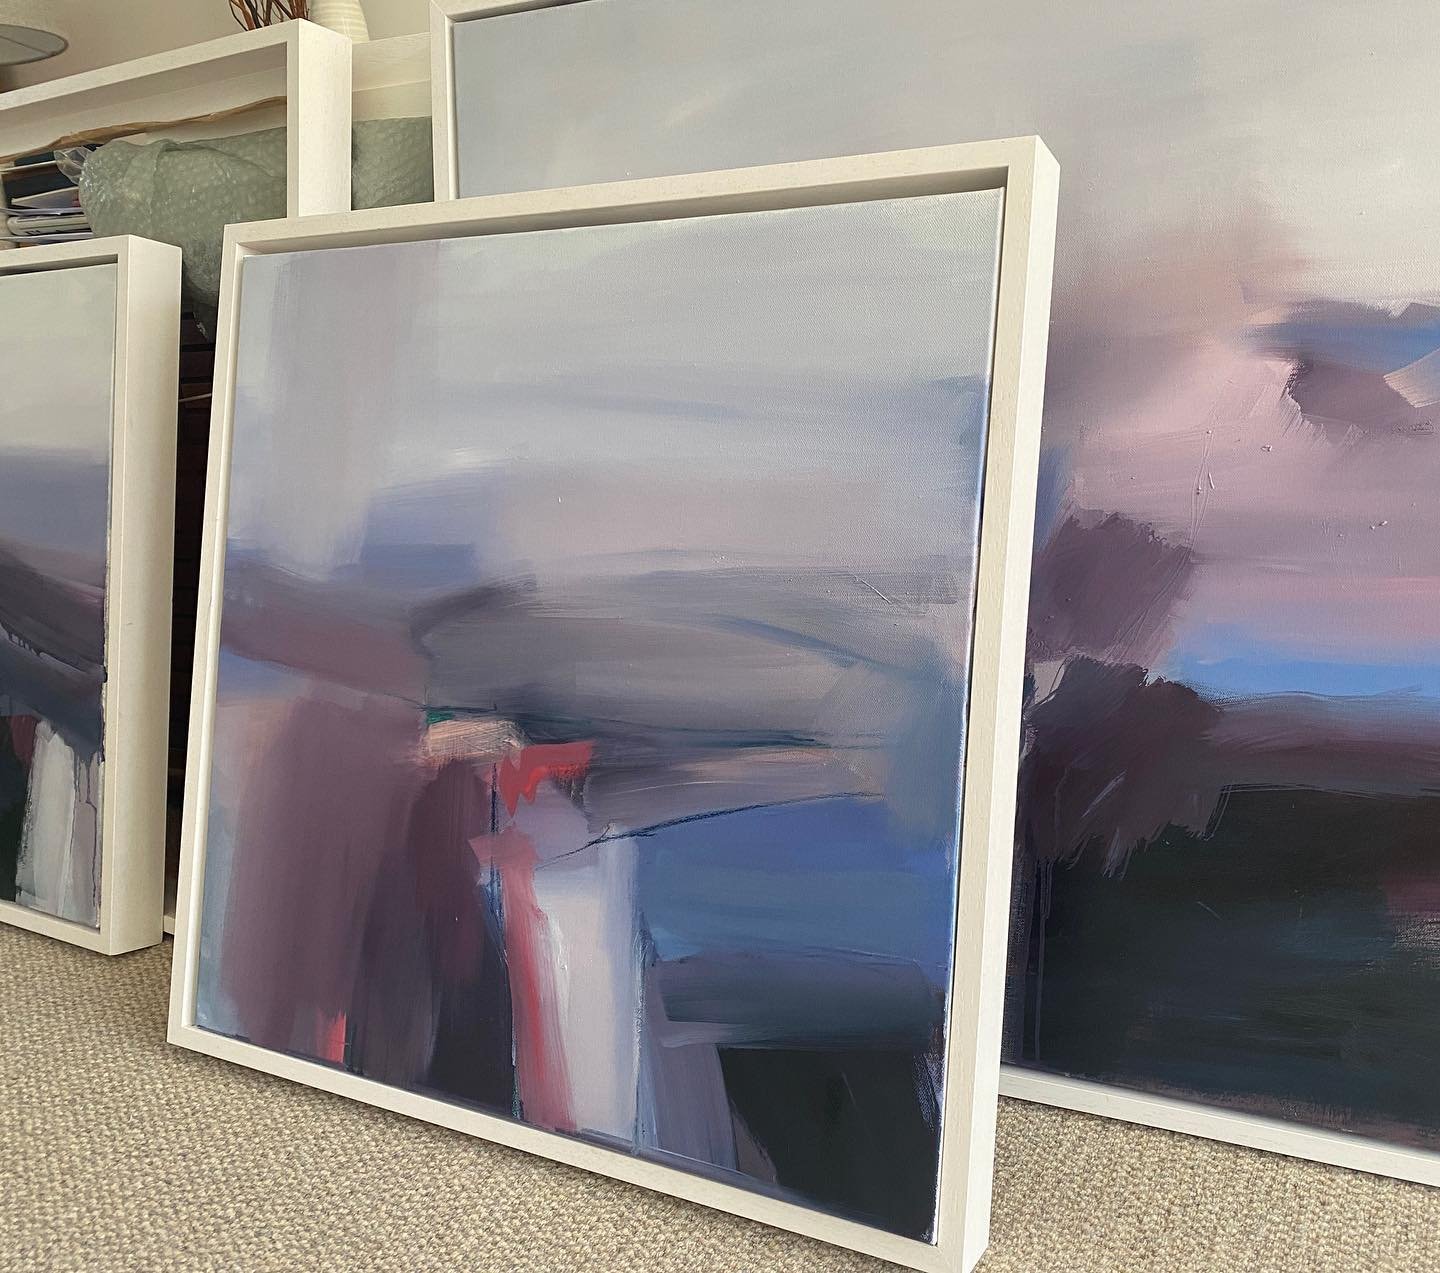 New paintings getting finished off and ready for Berretts Farm, this Monday 6th May ☀️

#sussexart 
#westsussexlife 
#westsussexartist 
#horshamartists 
#inspiredbythelandscape 
#contemporaryabstract 
#contemporaryabstraction 
#britishabstractpaintin